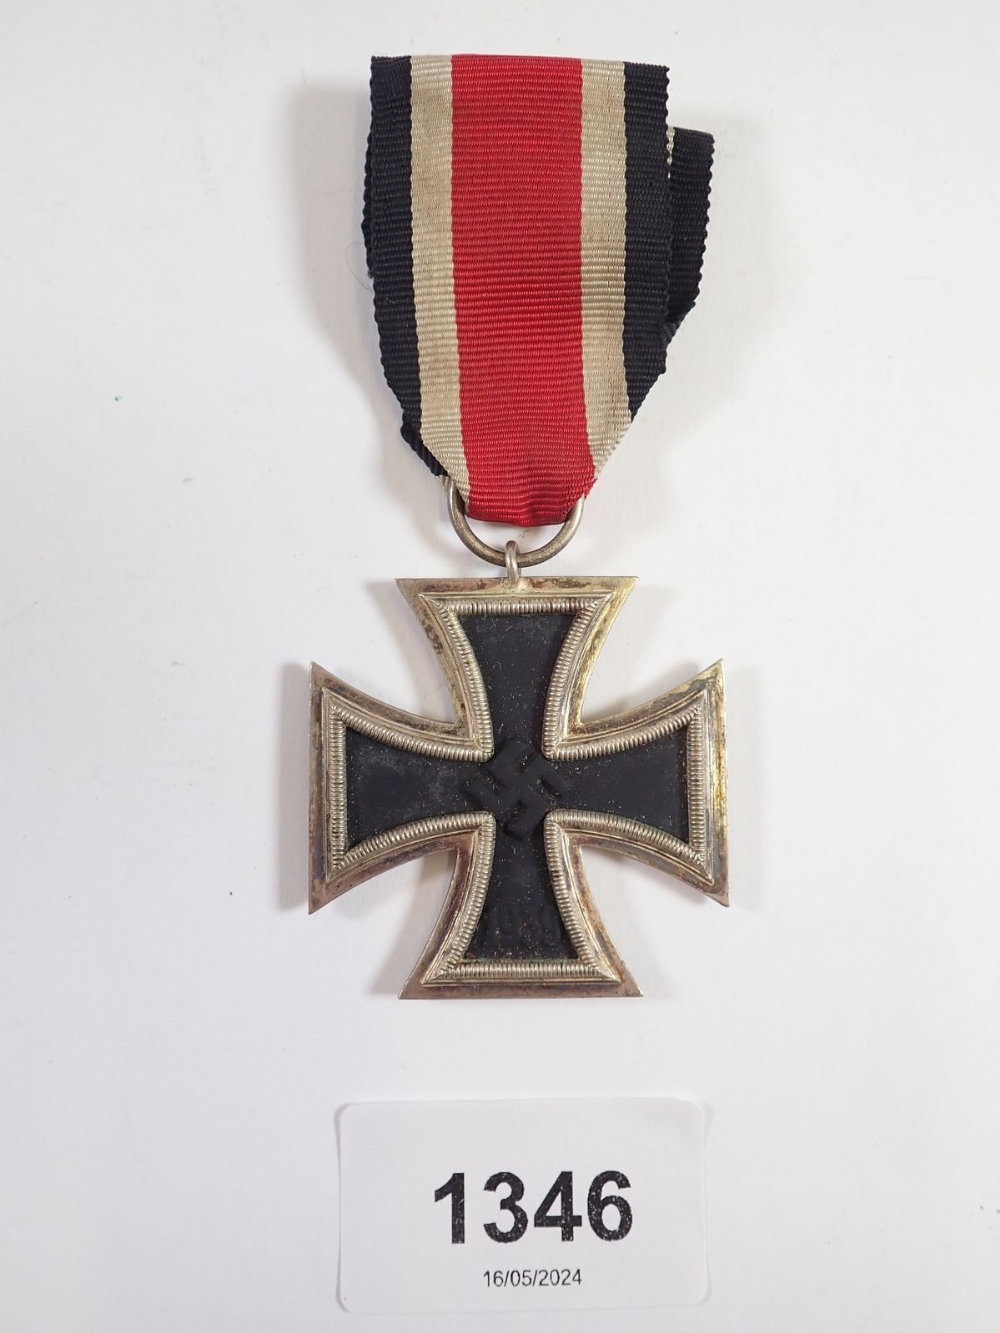 A WWII German iron cross - boxed with ribbon - Image 2 of 3